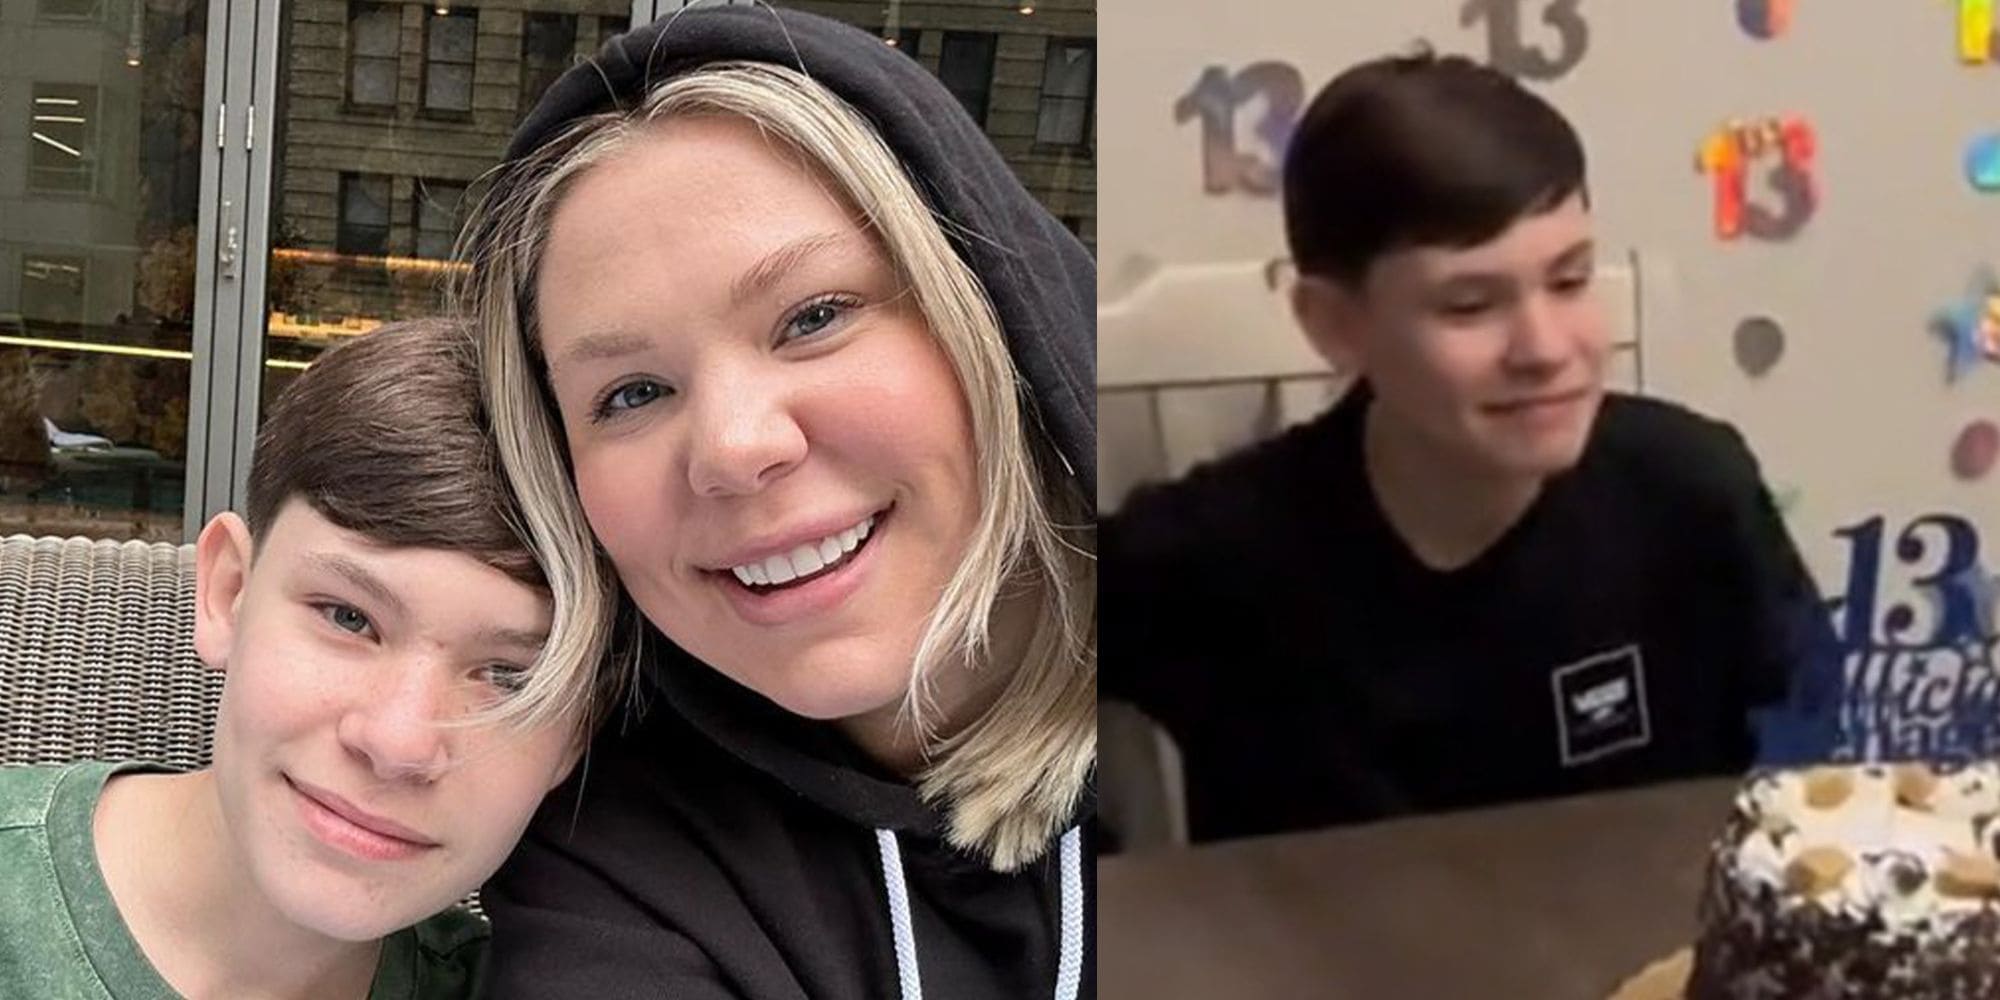 On His 14th Birthday, Kailyn Lowry Pleasantly Surprised Her Son Isaac With Tickets to See Olivia Rodrigo in Concert